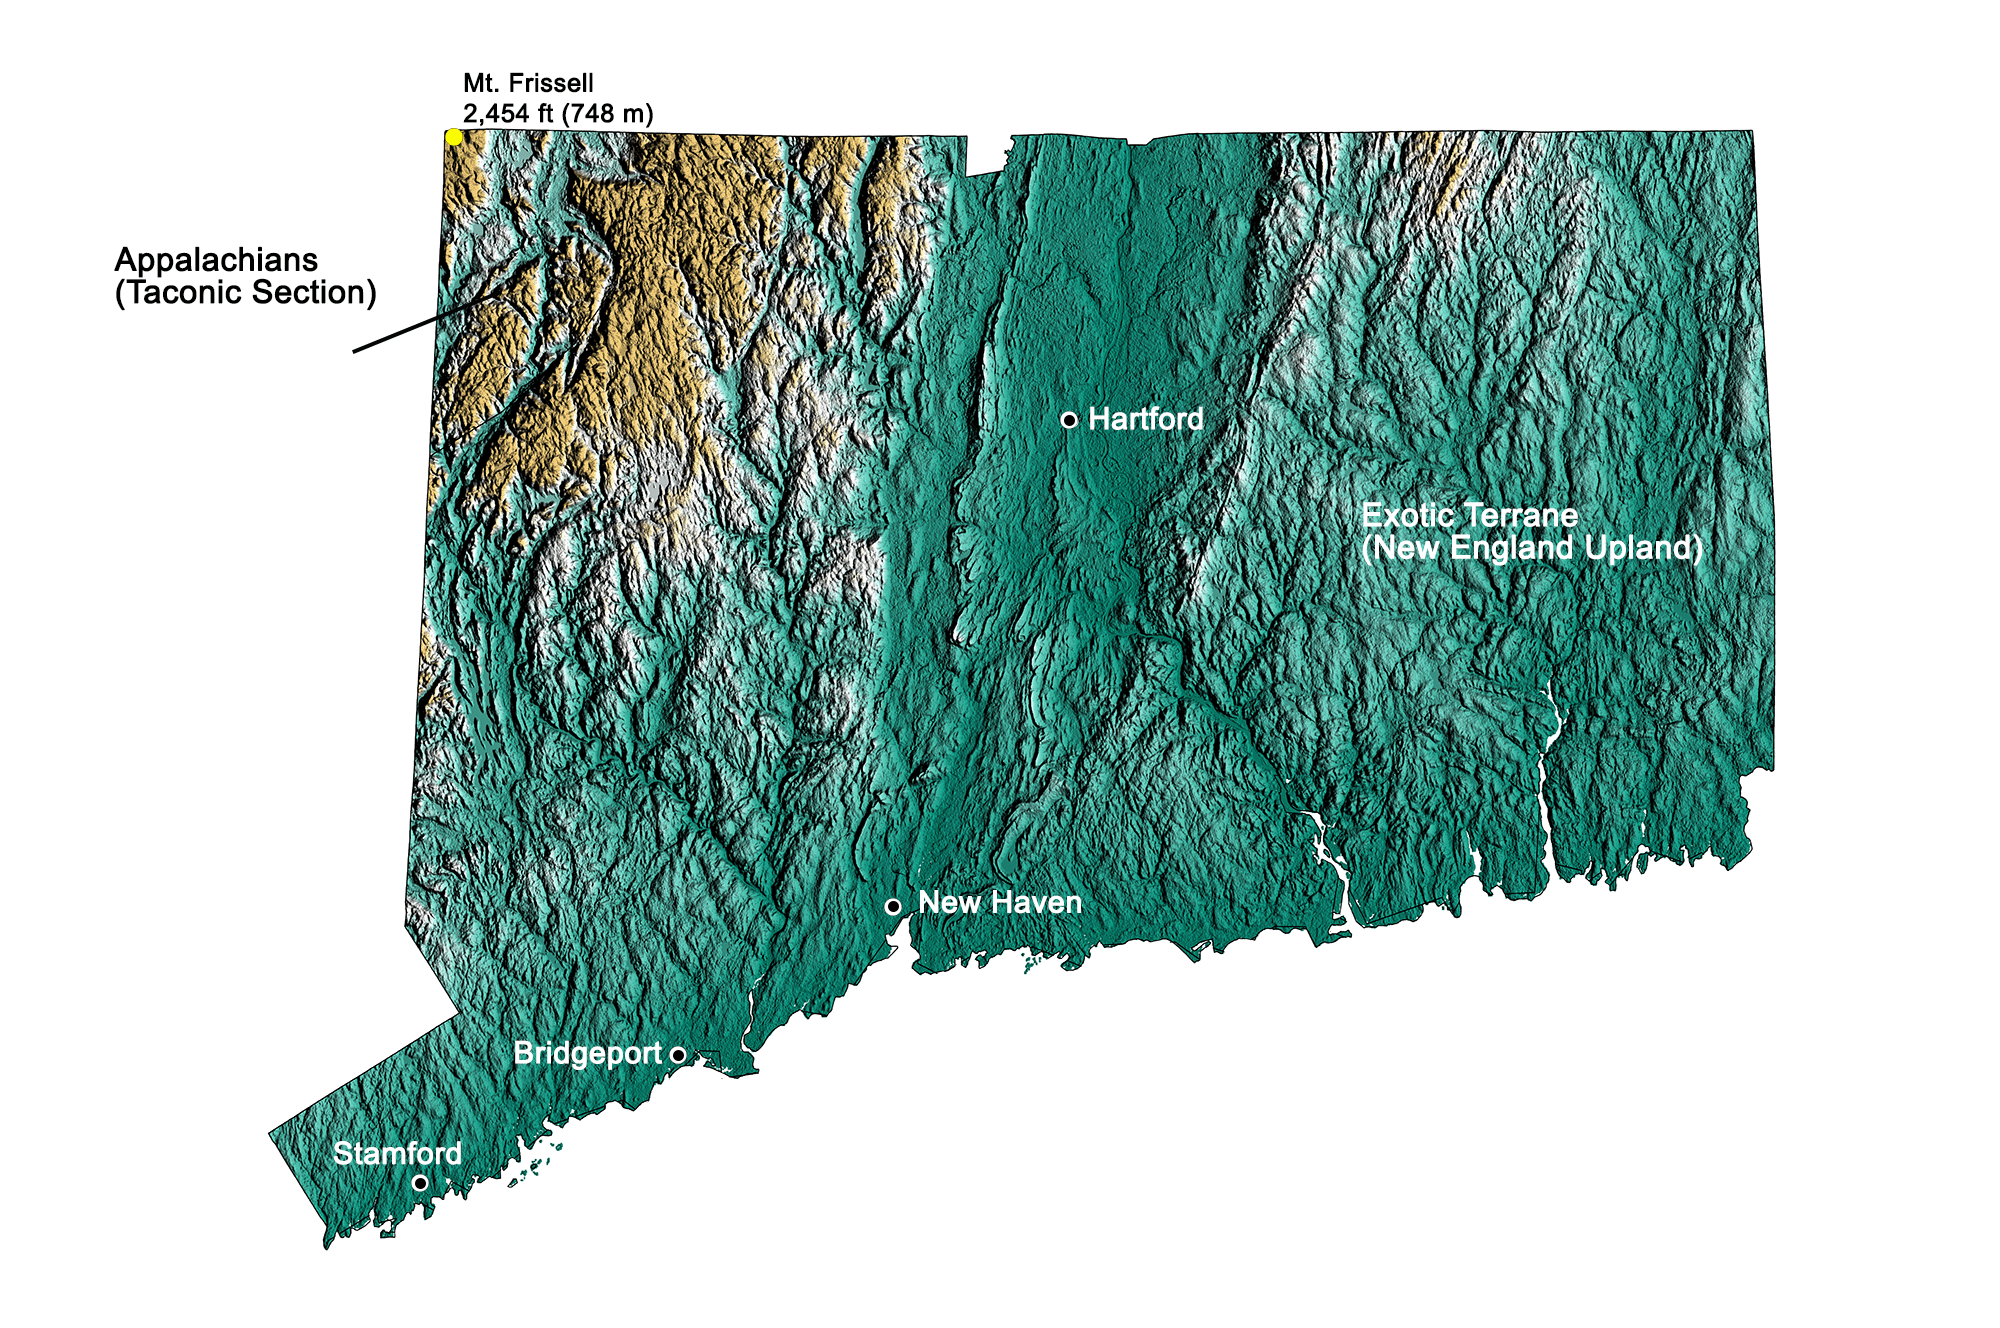 Topographic map of Connecticut.